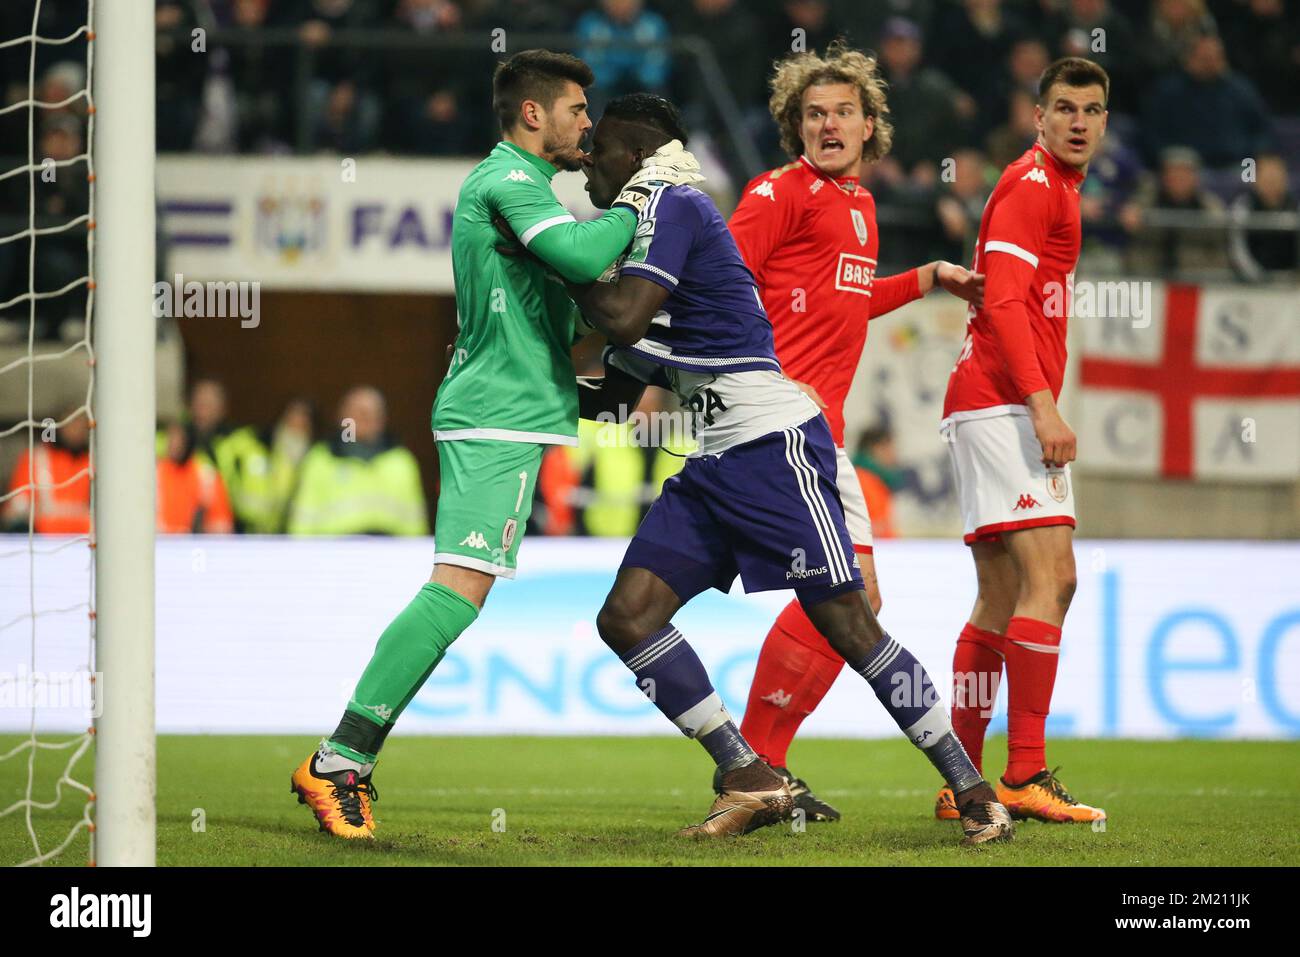 Standard's goalkeeper Victor Valdes Arriba and Anderlecht's Kara Mbodji fight during the Jupiler Pro League match between RSC Anderlecht and Standard de Liege, in Brussels, Sunday 28 February 2016, on day 28 of the Belgian soccer championship. BELGA PHOTO VIRGINIE LEFOUR Stock Photo